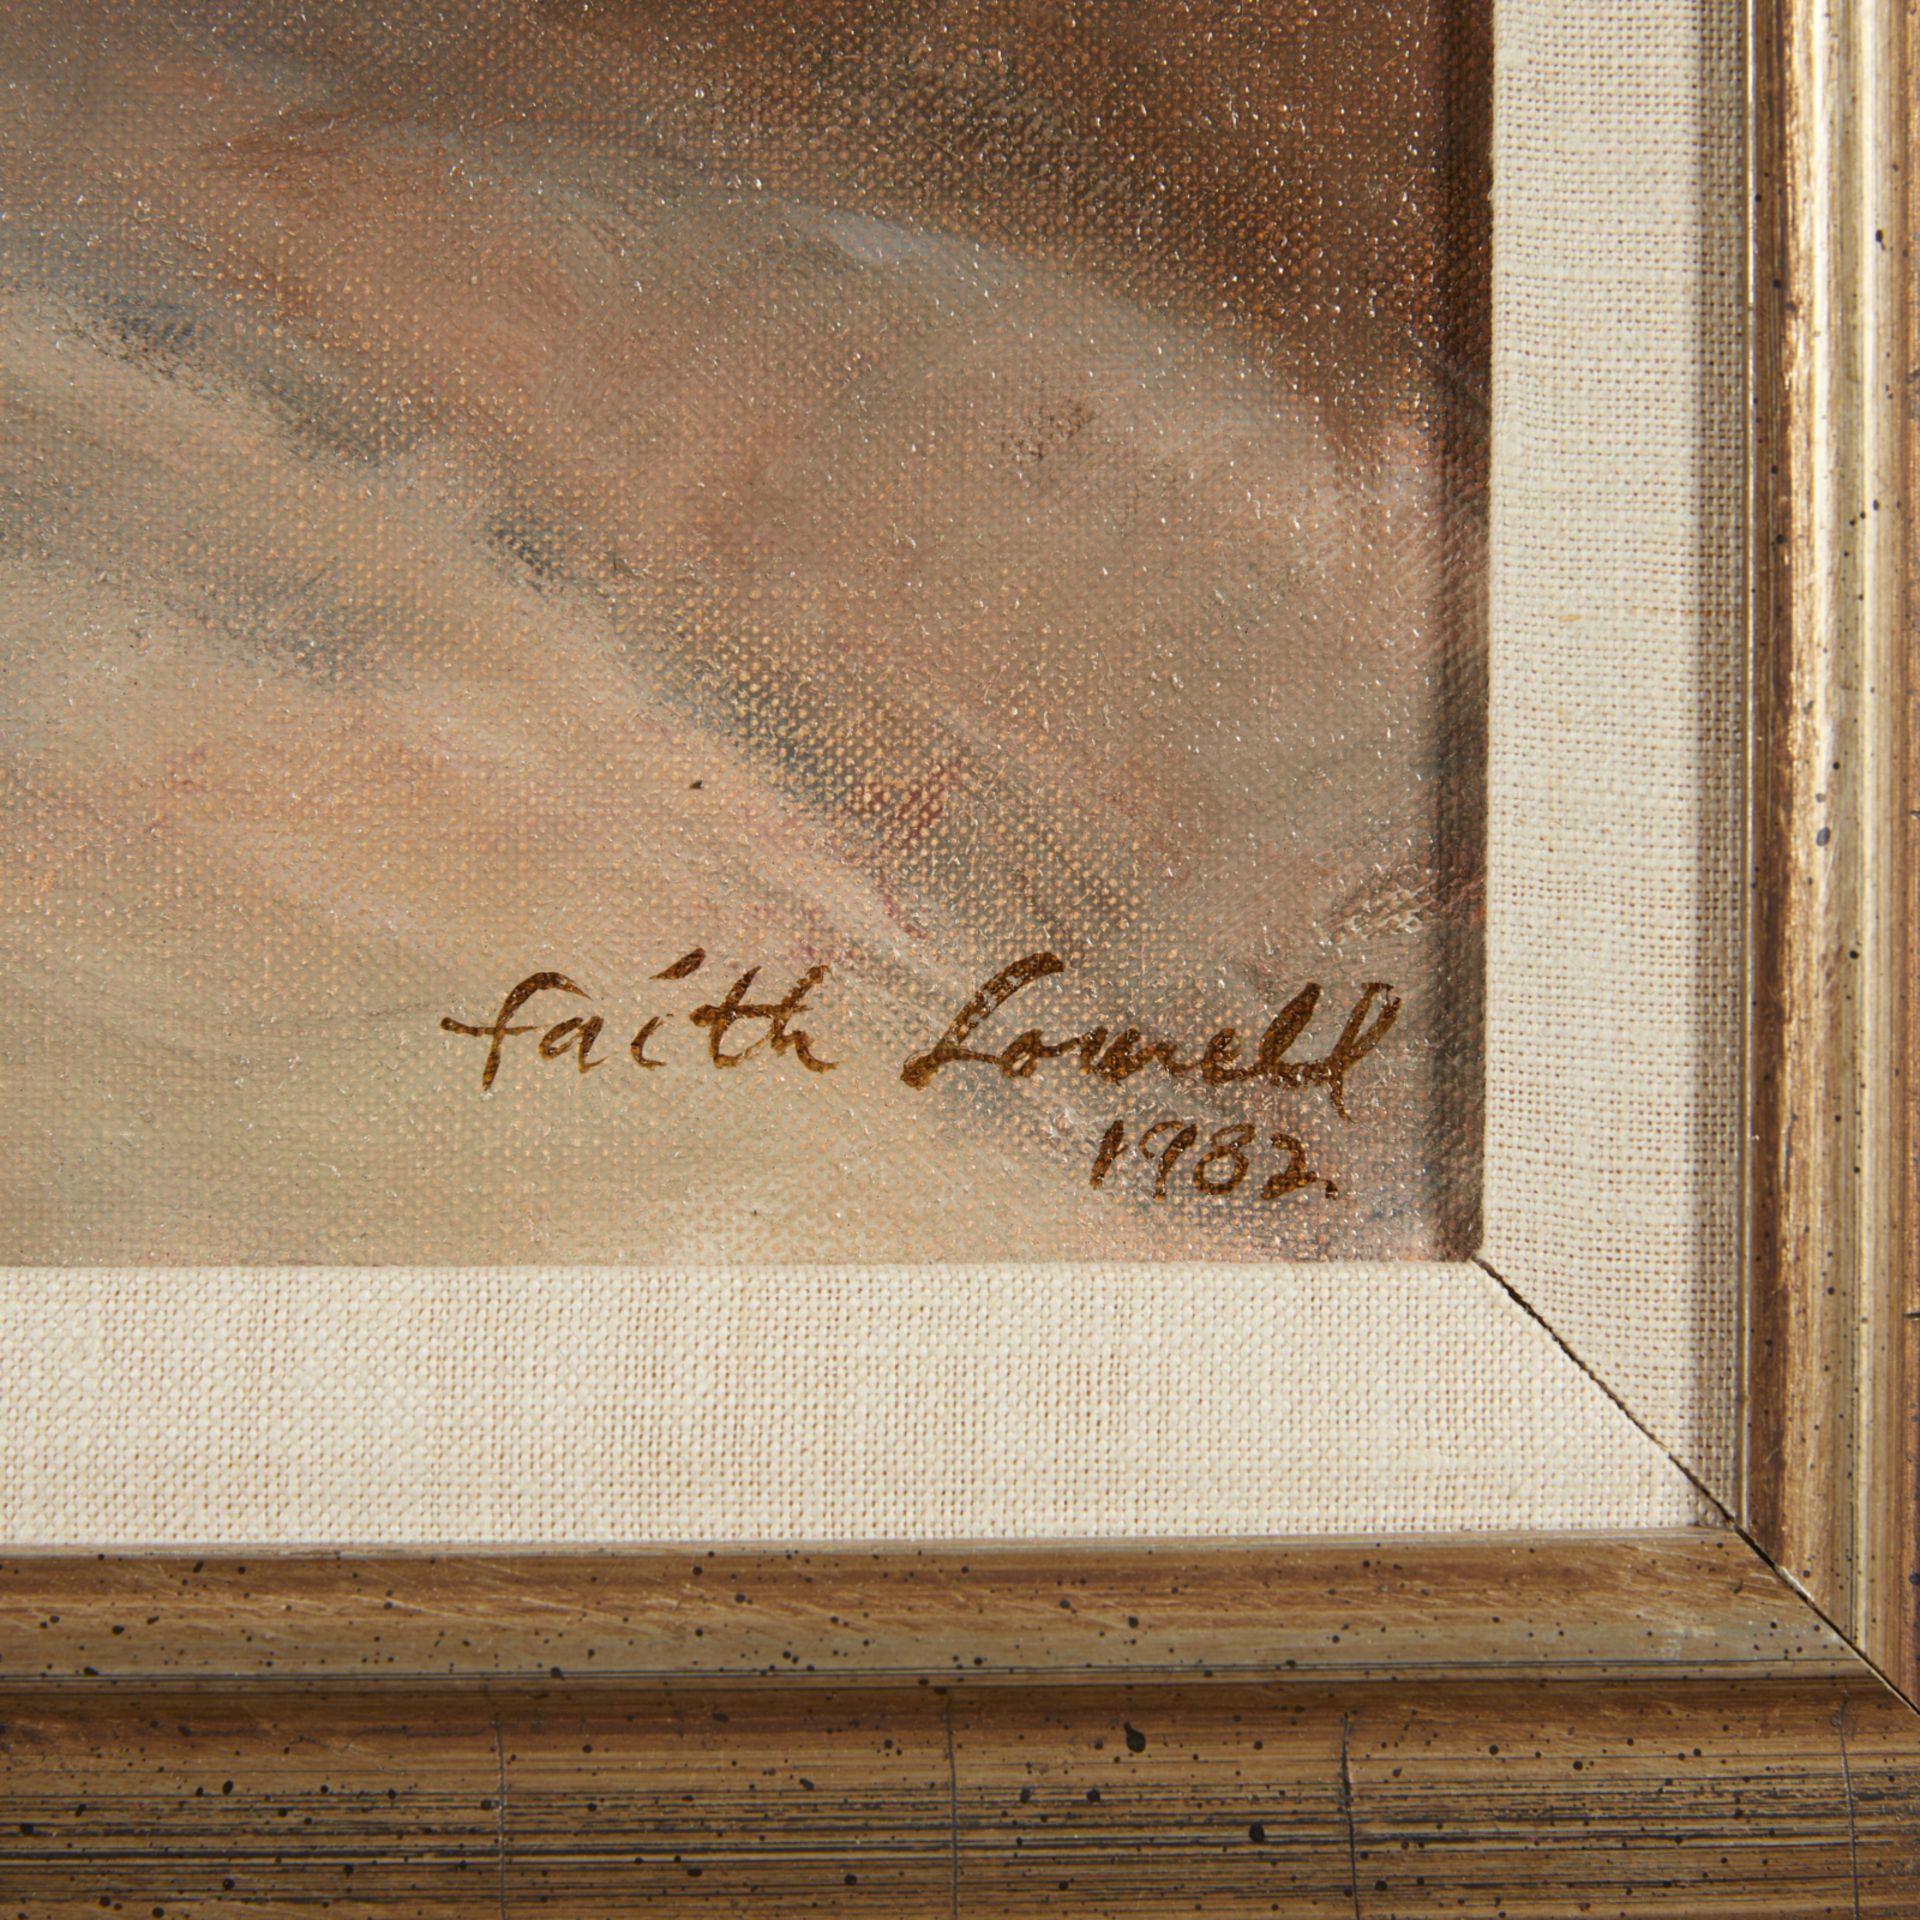 Faith Lowell "Growing Up" Landscape Painting 1982 - Image 5 of 8